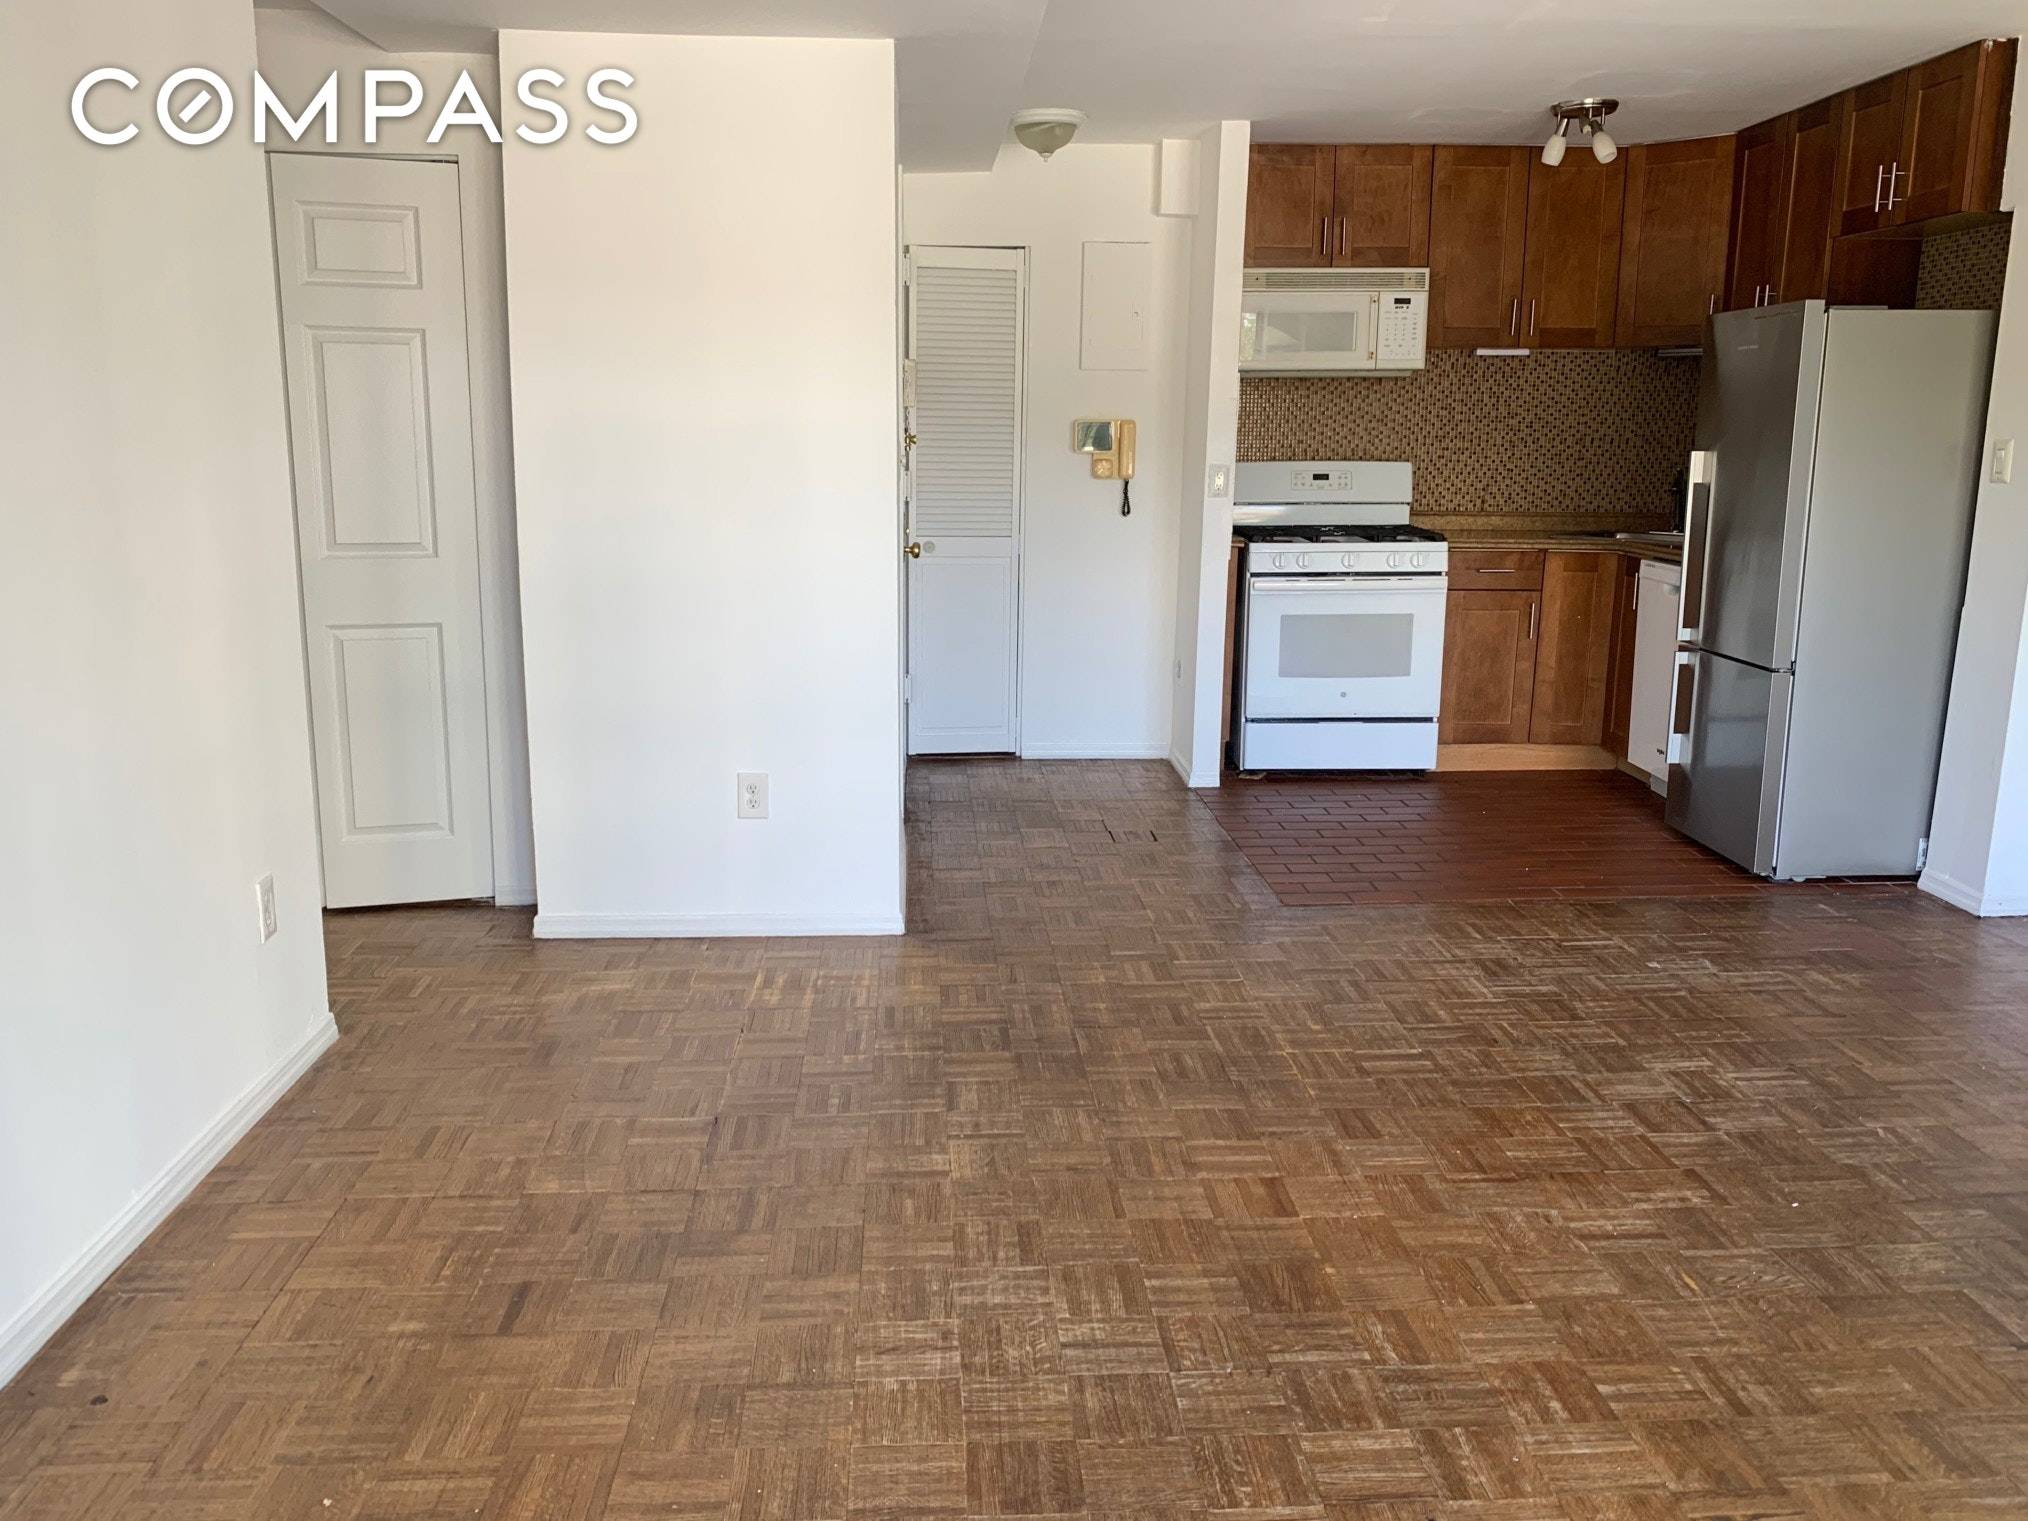 NETHERLAND TERRACE is a meticulously maintained 2 bedroom 2 bathroom condominium located one block off Johnson Avenue in the Spuyten Duyvil Riverdale section of the Bronx just one block west ...